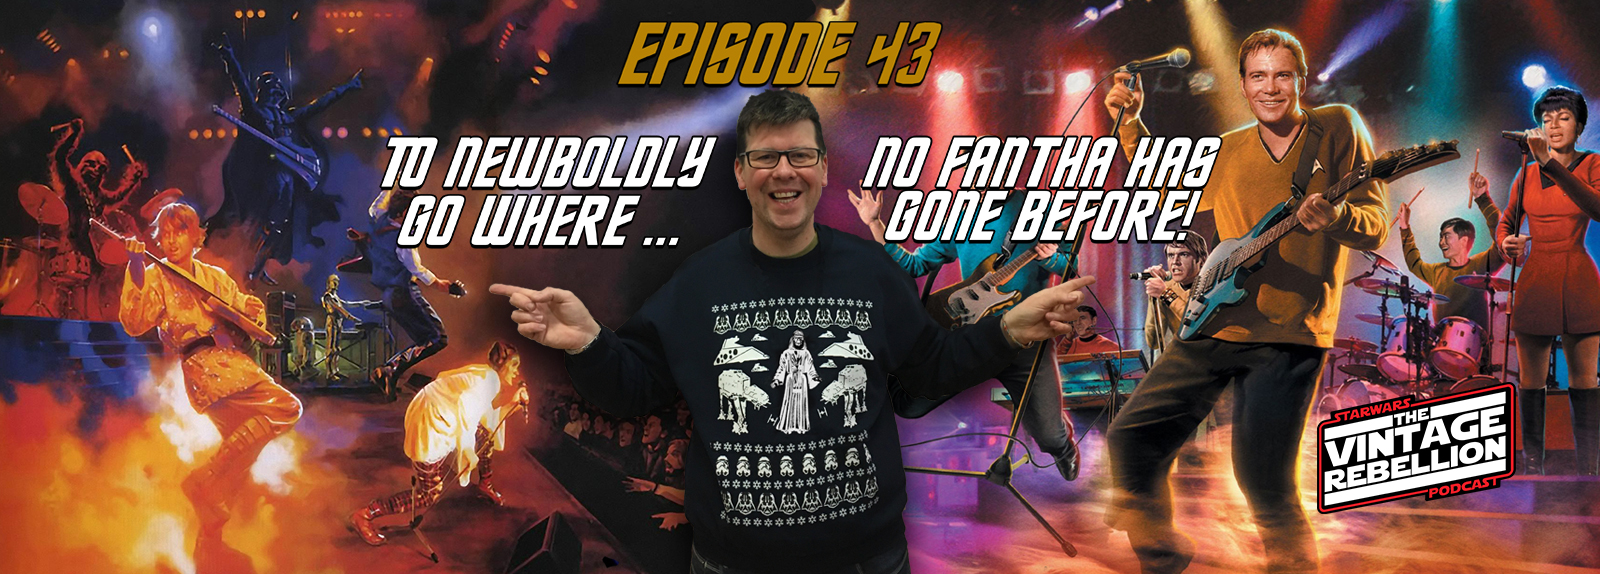 Episode 43 : To Newboldly Go Where No Fantha Has Gone Before!